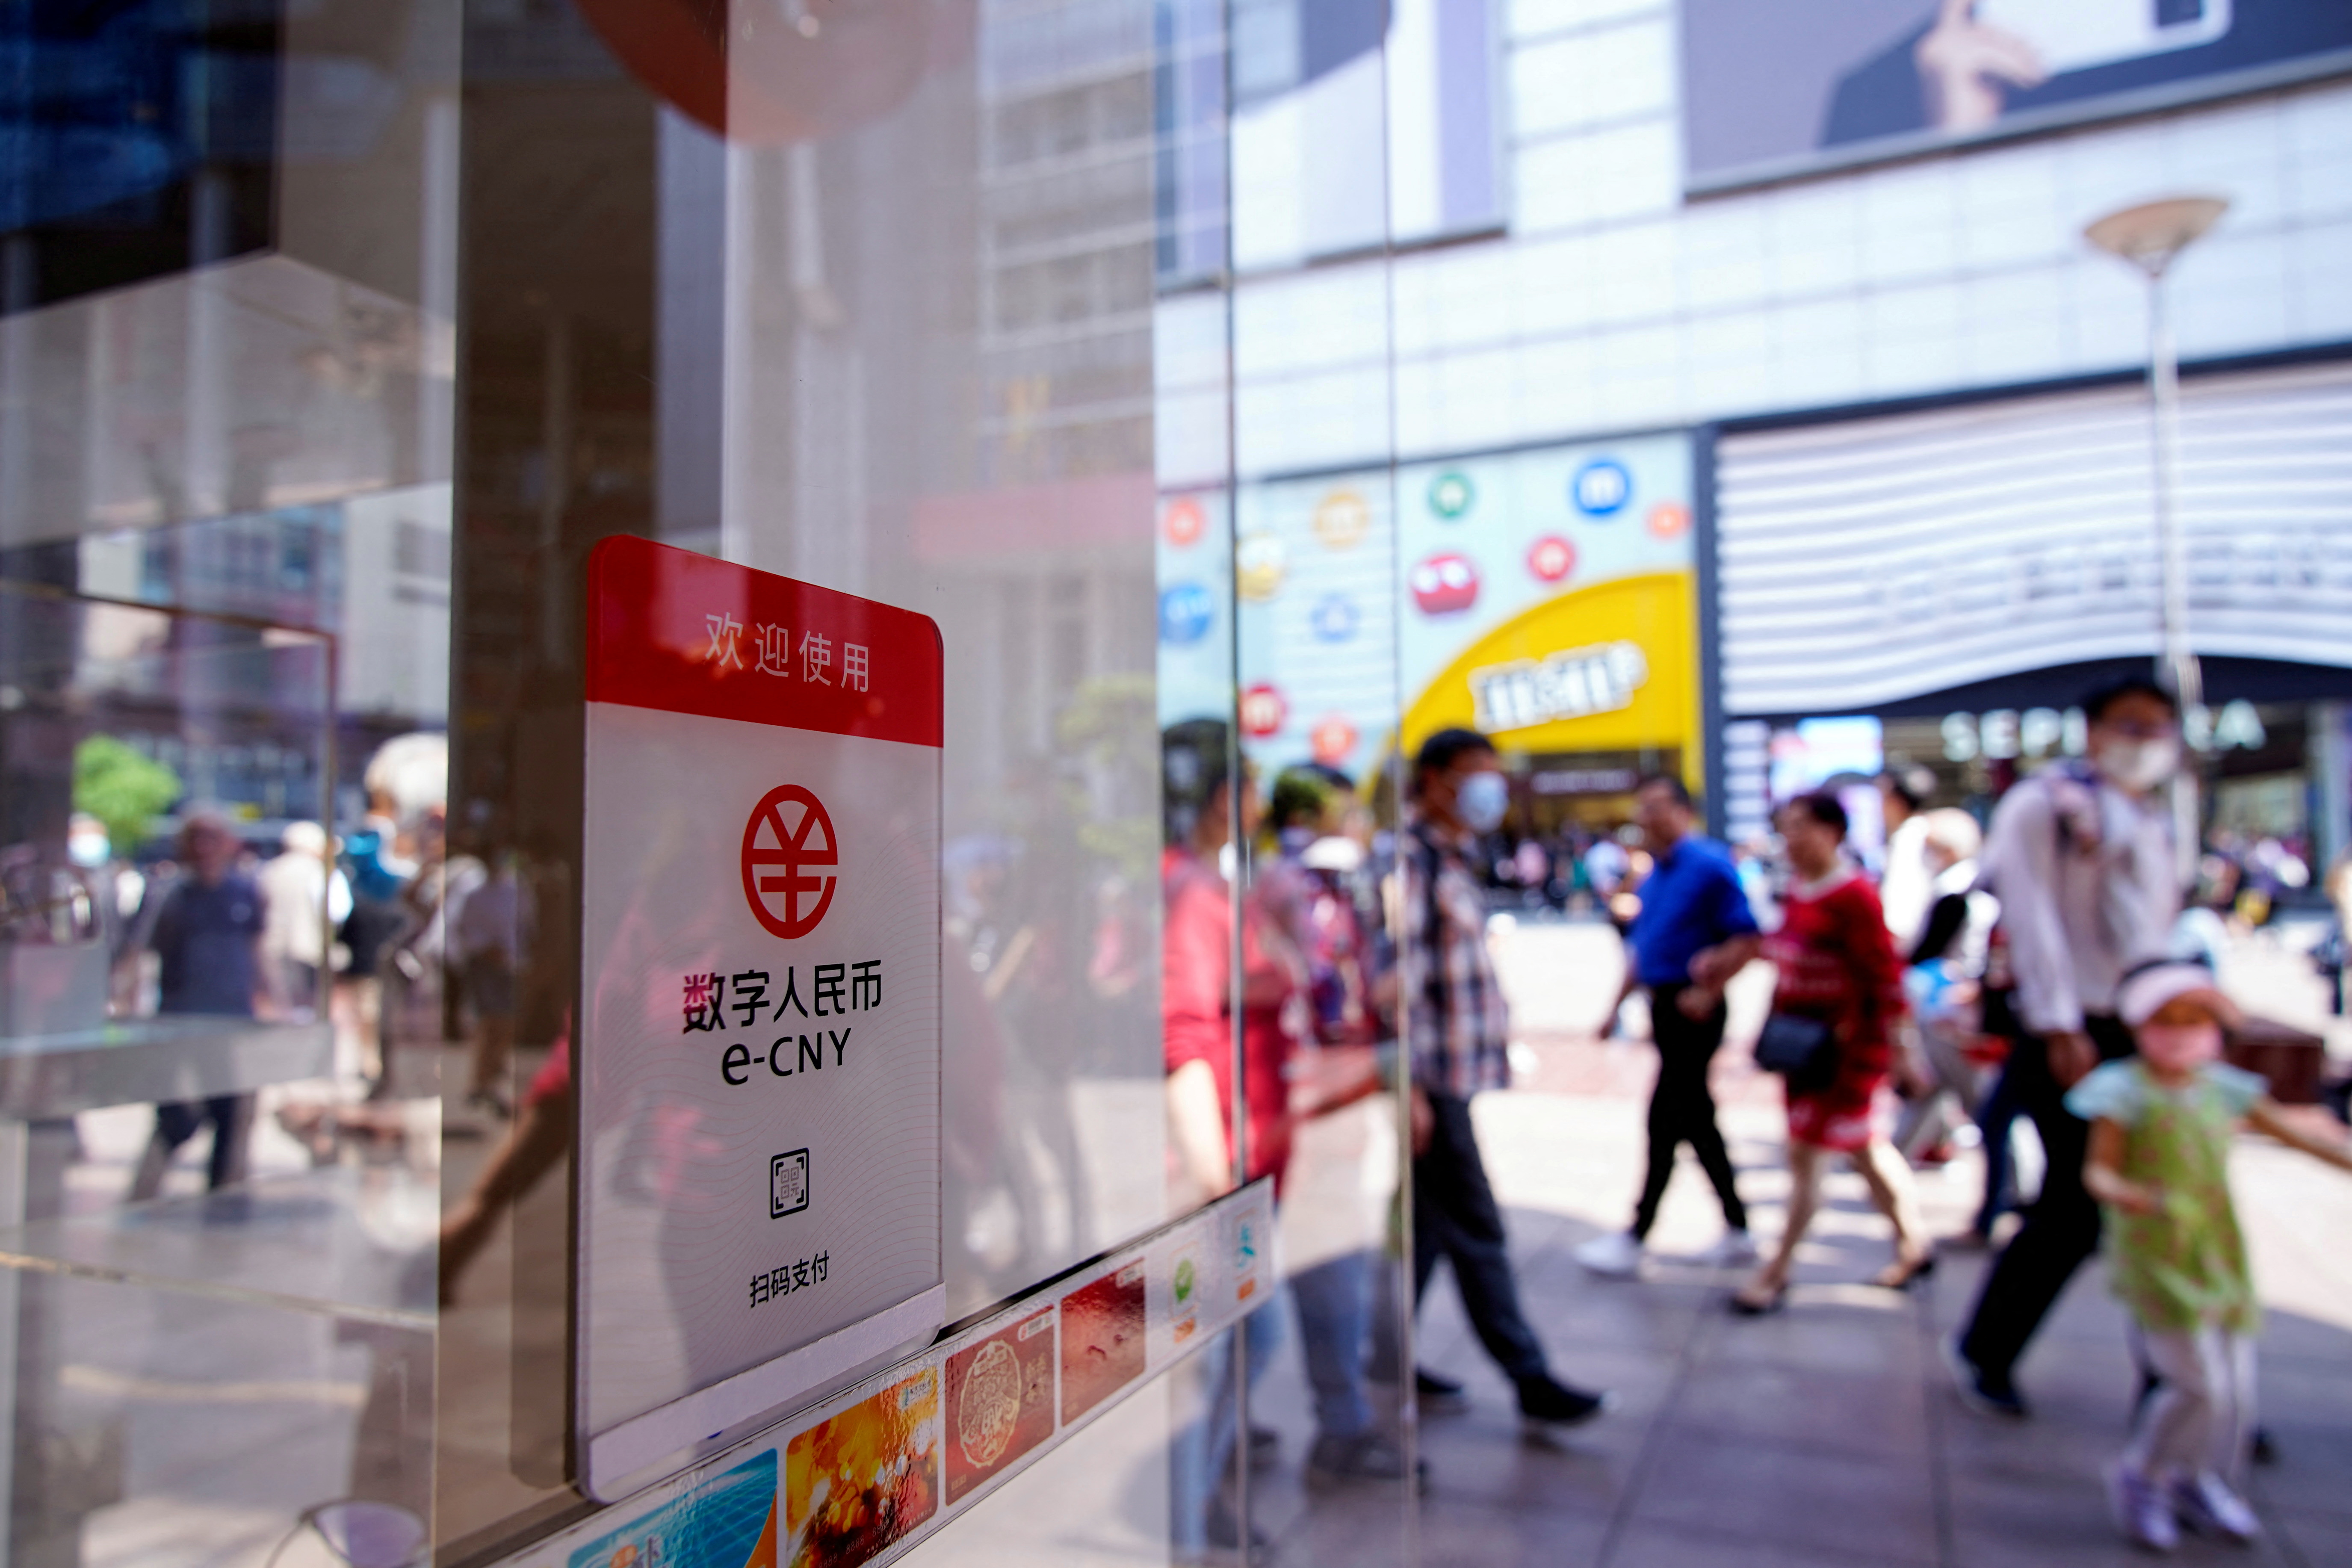 A sign indicating digital yuan, also referred to as e-CNY, is pictured at a shopping mall in Shanghai